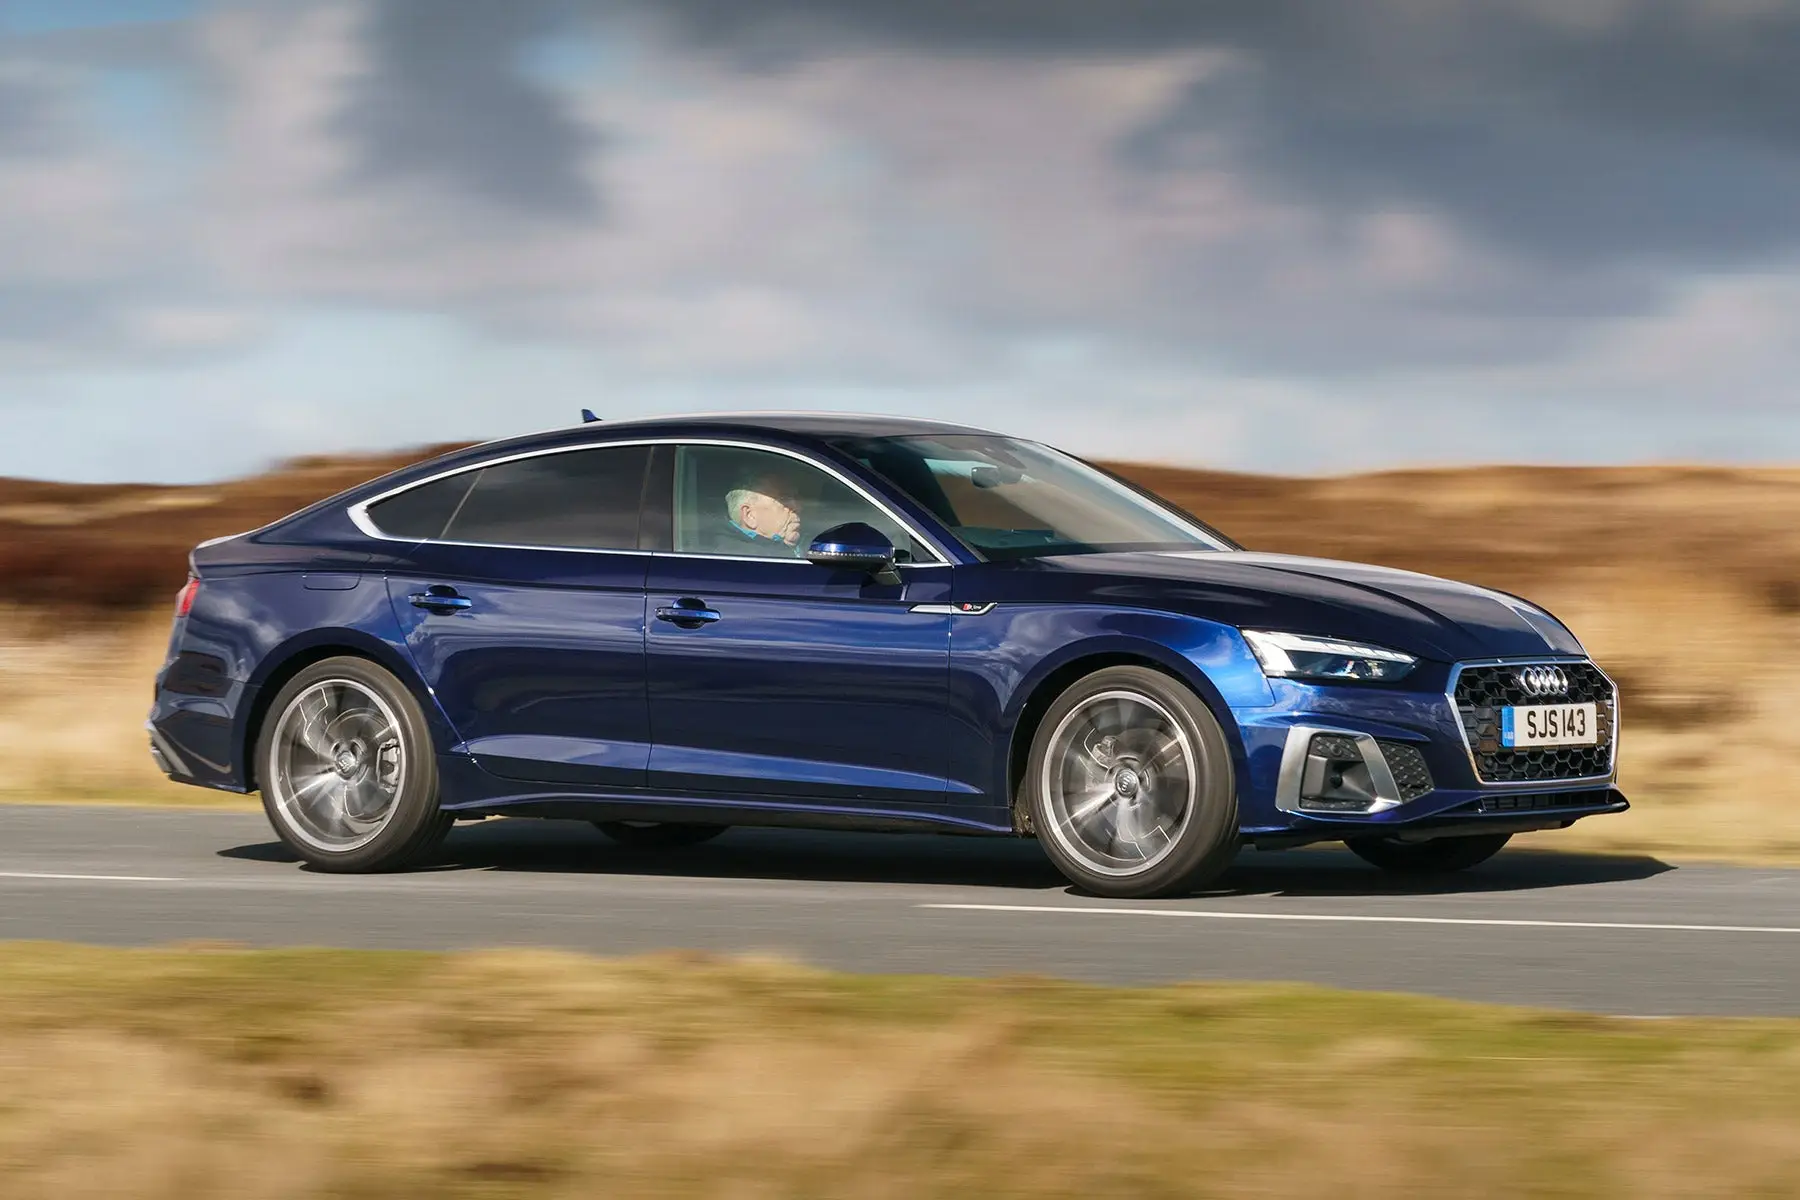 2020 Audi A5 Sportback Shows Its Tasteful Facelift In New Video